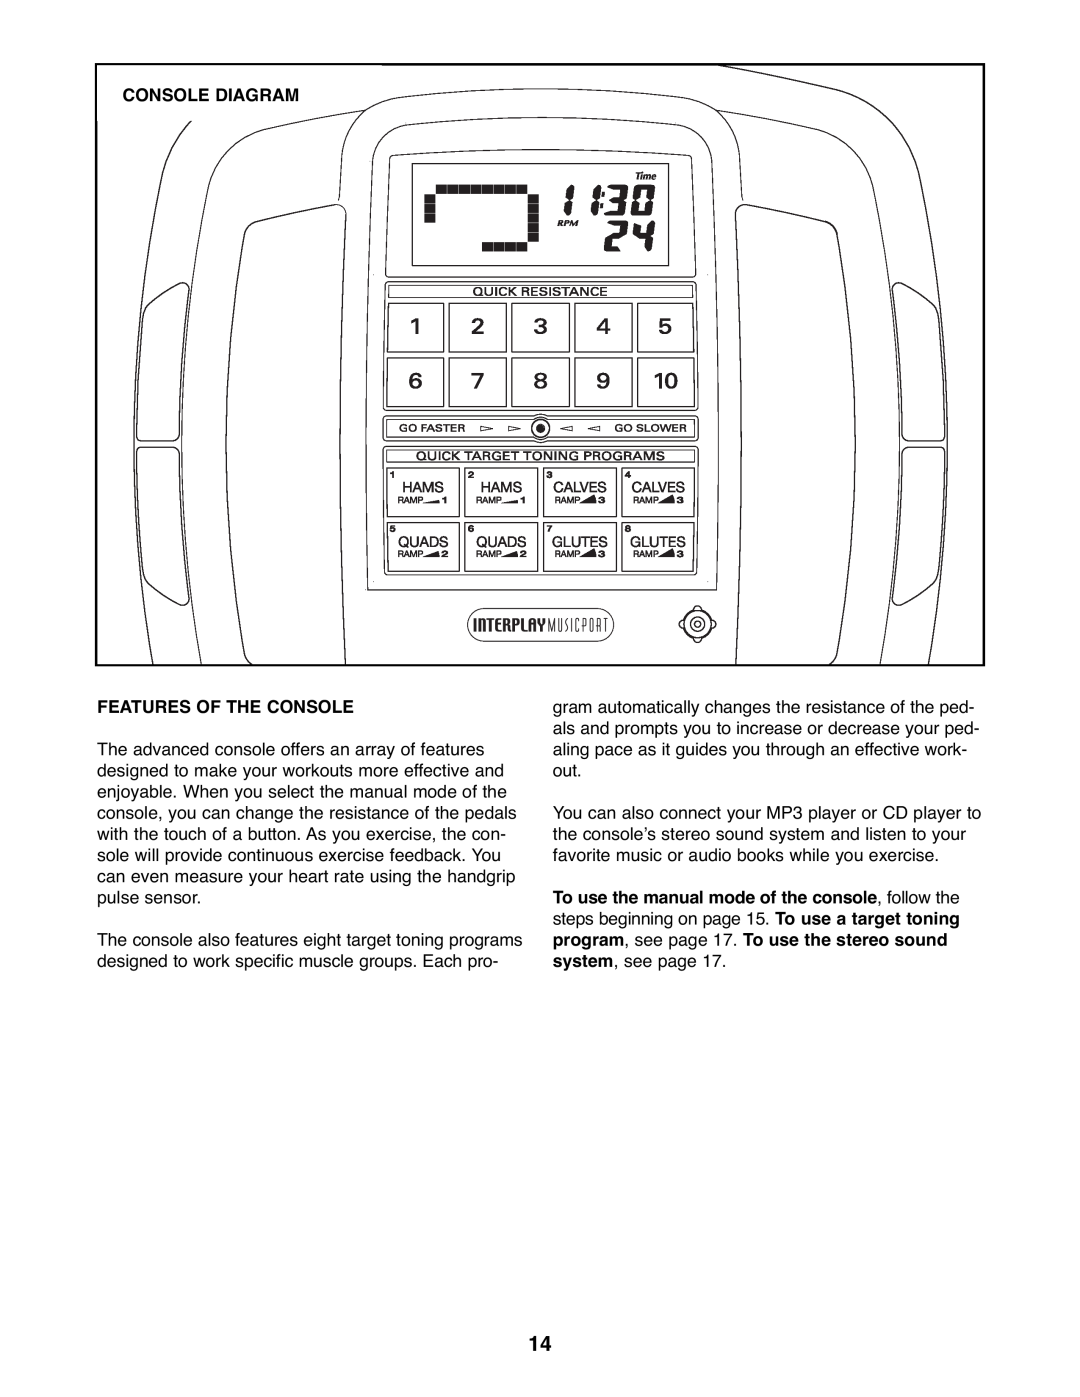 ProForm PFEL73207.0 user manual Console Diagram, Features Of The Console 